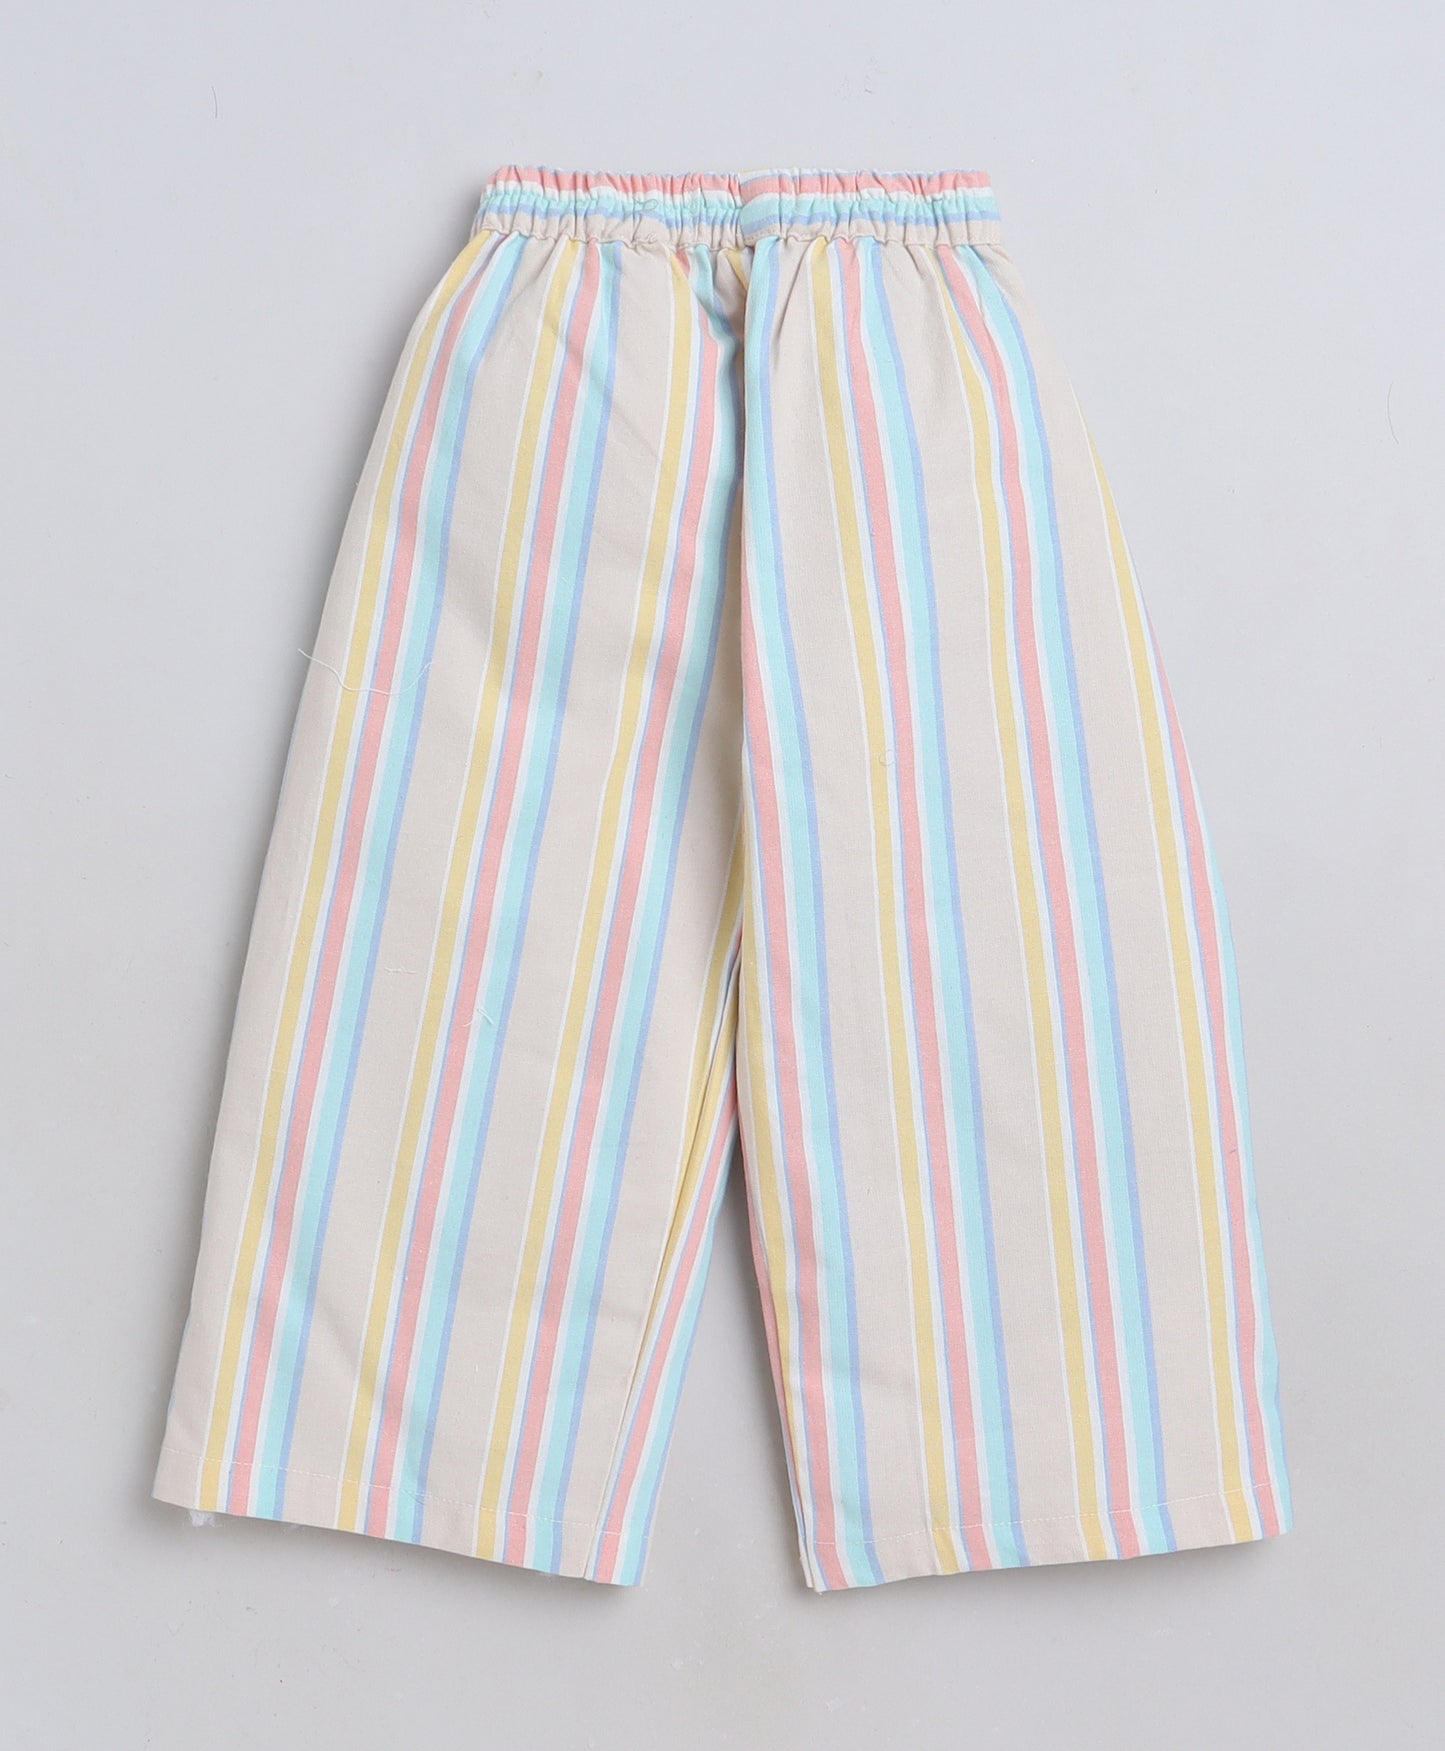 Stripes Coord set with Pants and top with Cute Ribbon detailing